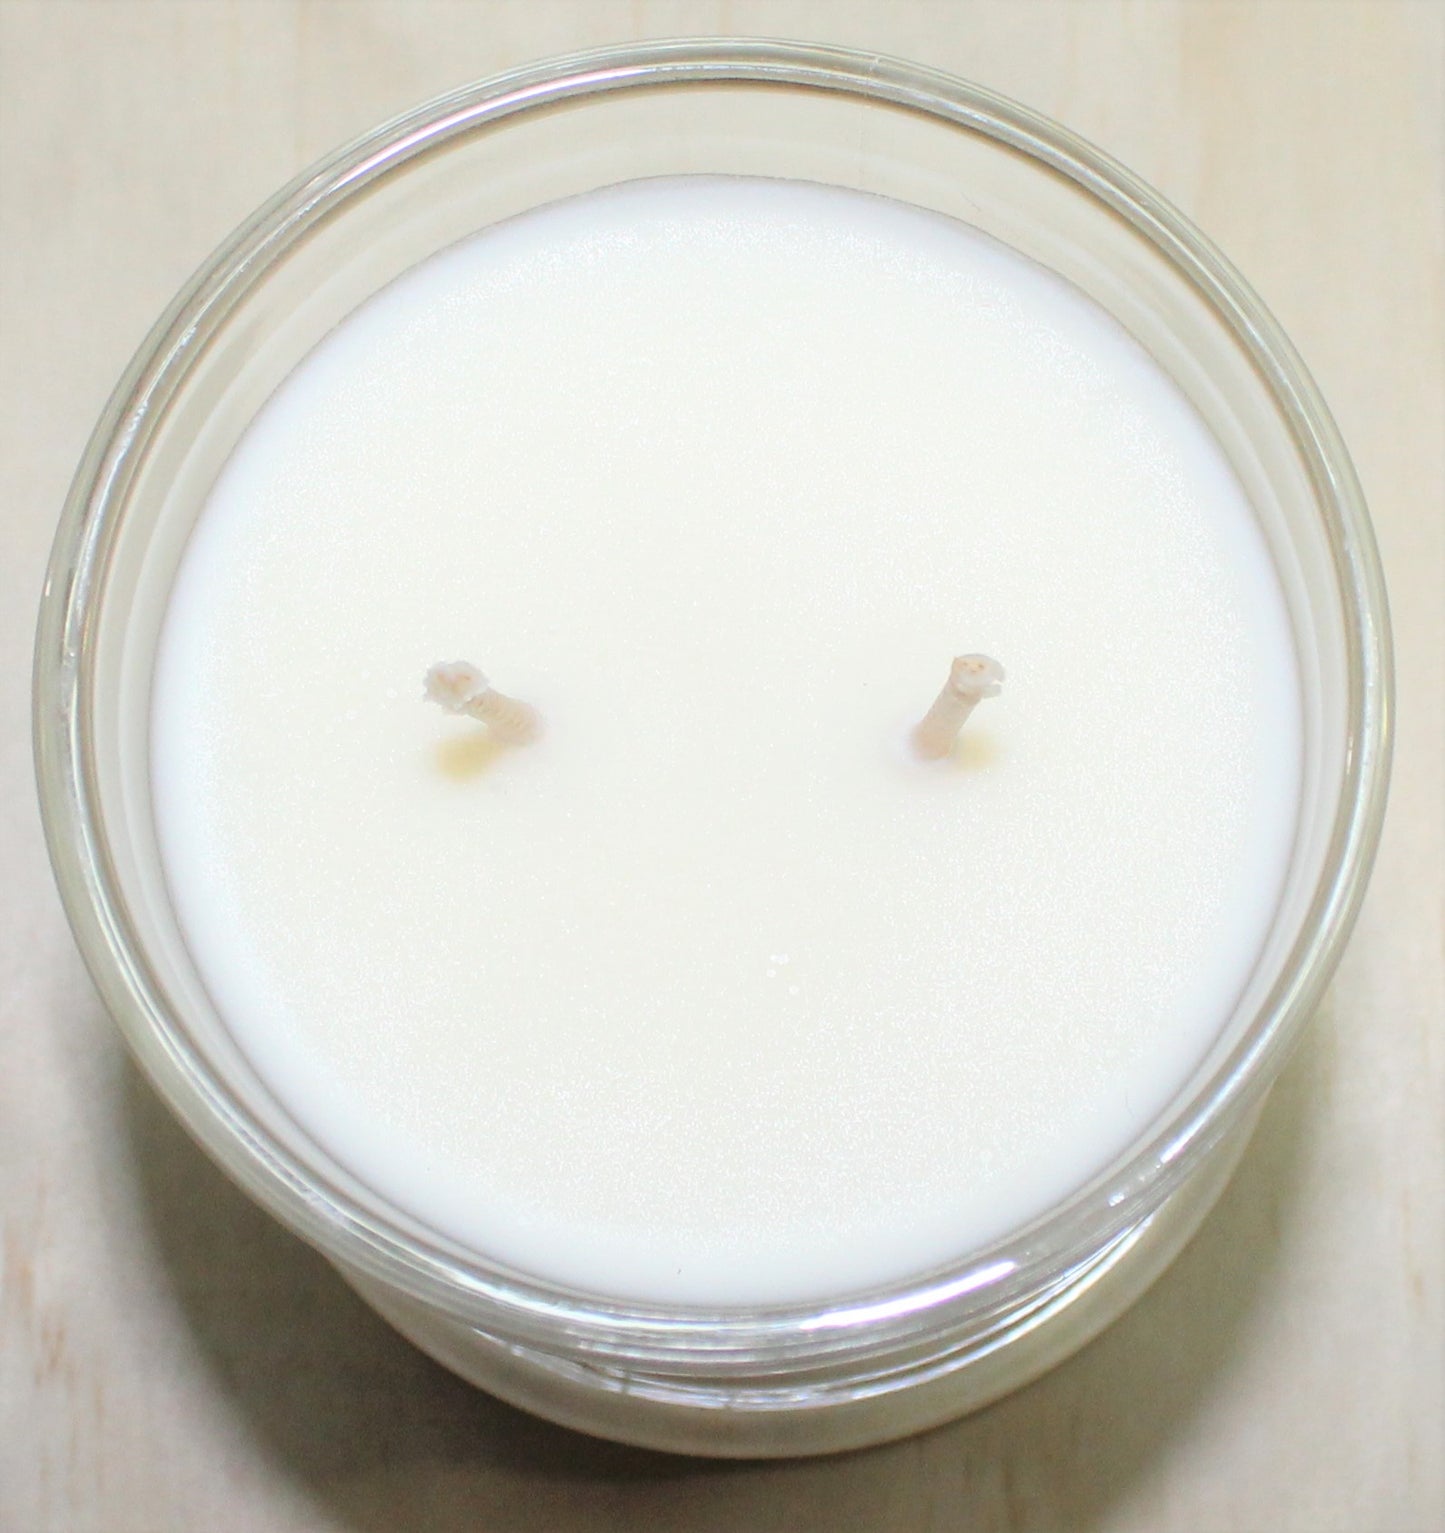 Vanilla Cove Soy Candle 50 hour Vanilla Fragrance in clear glass jar image shows 2 wicks